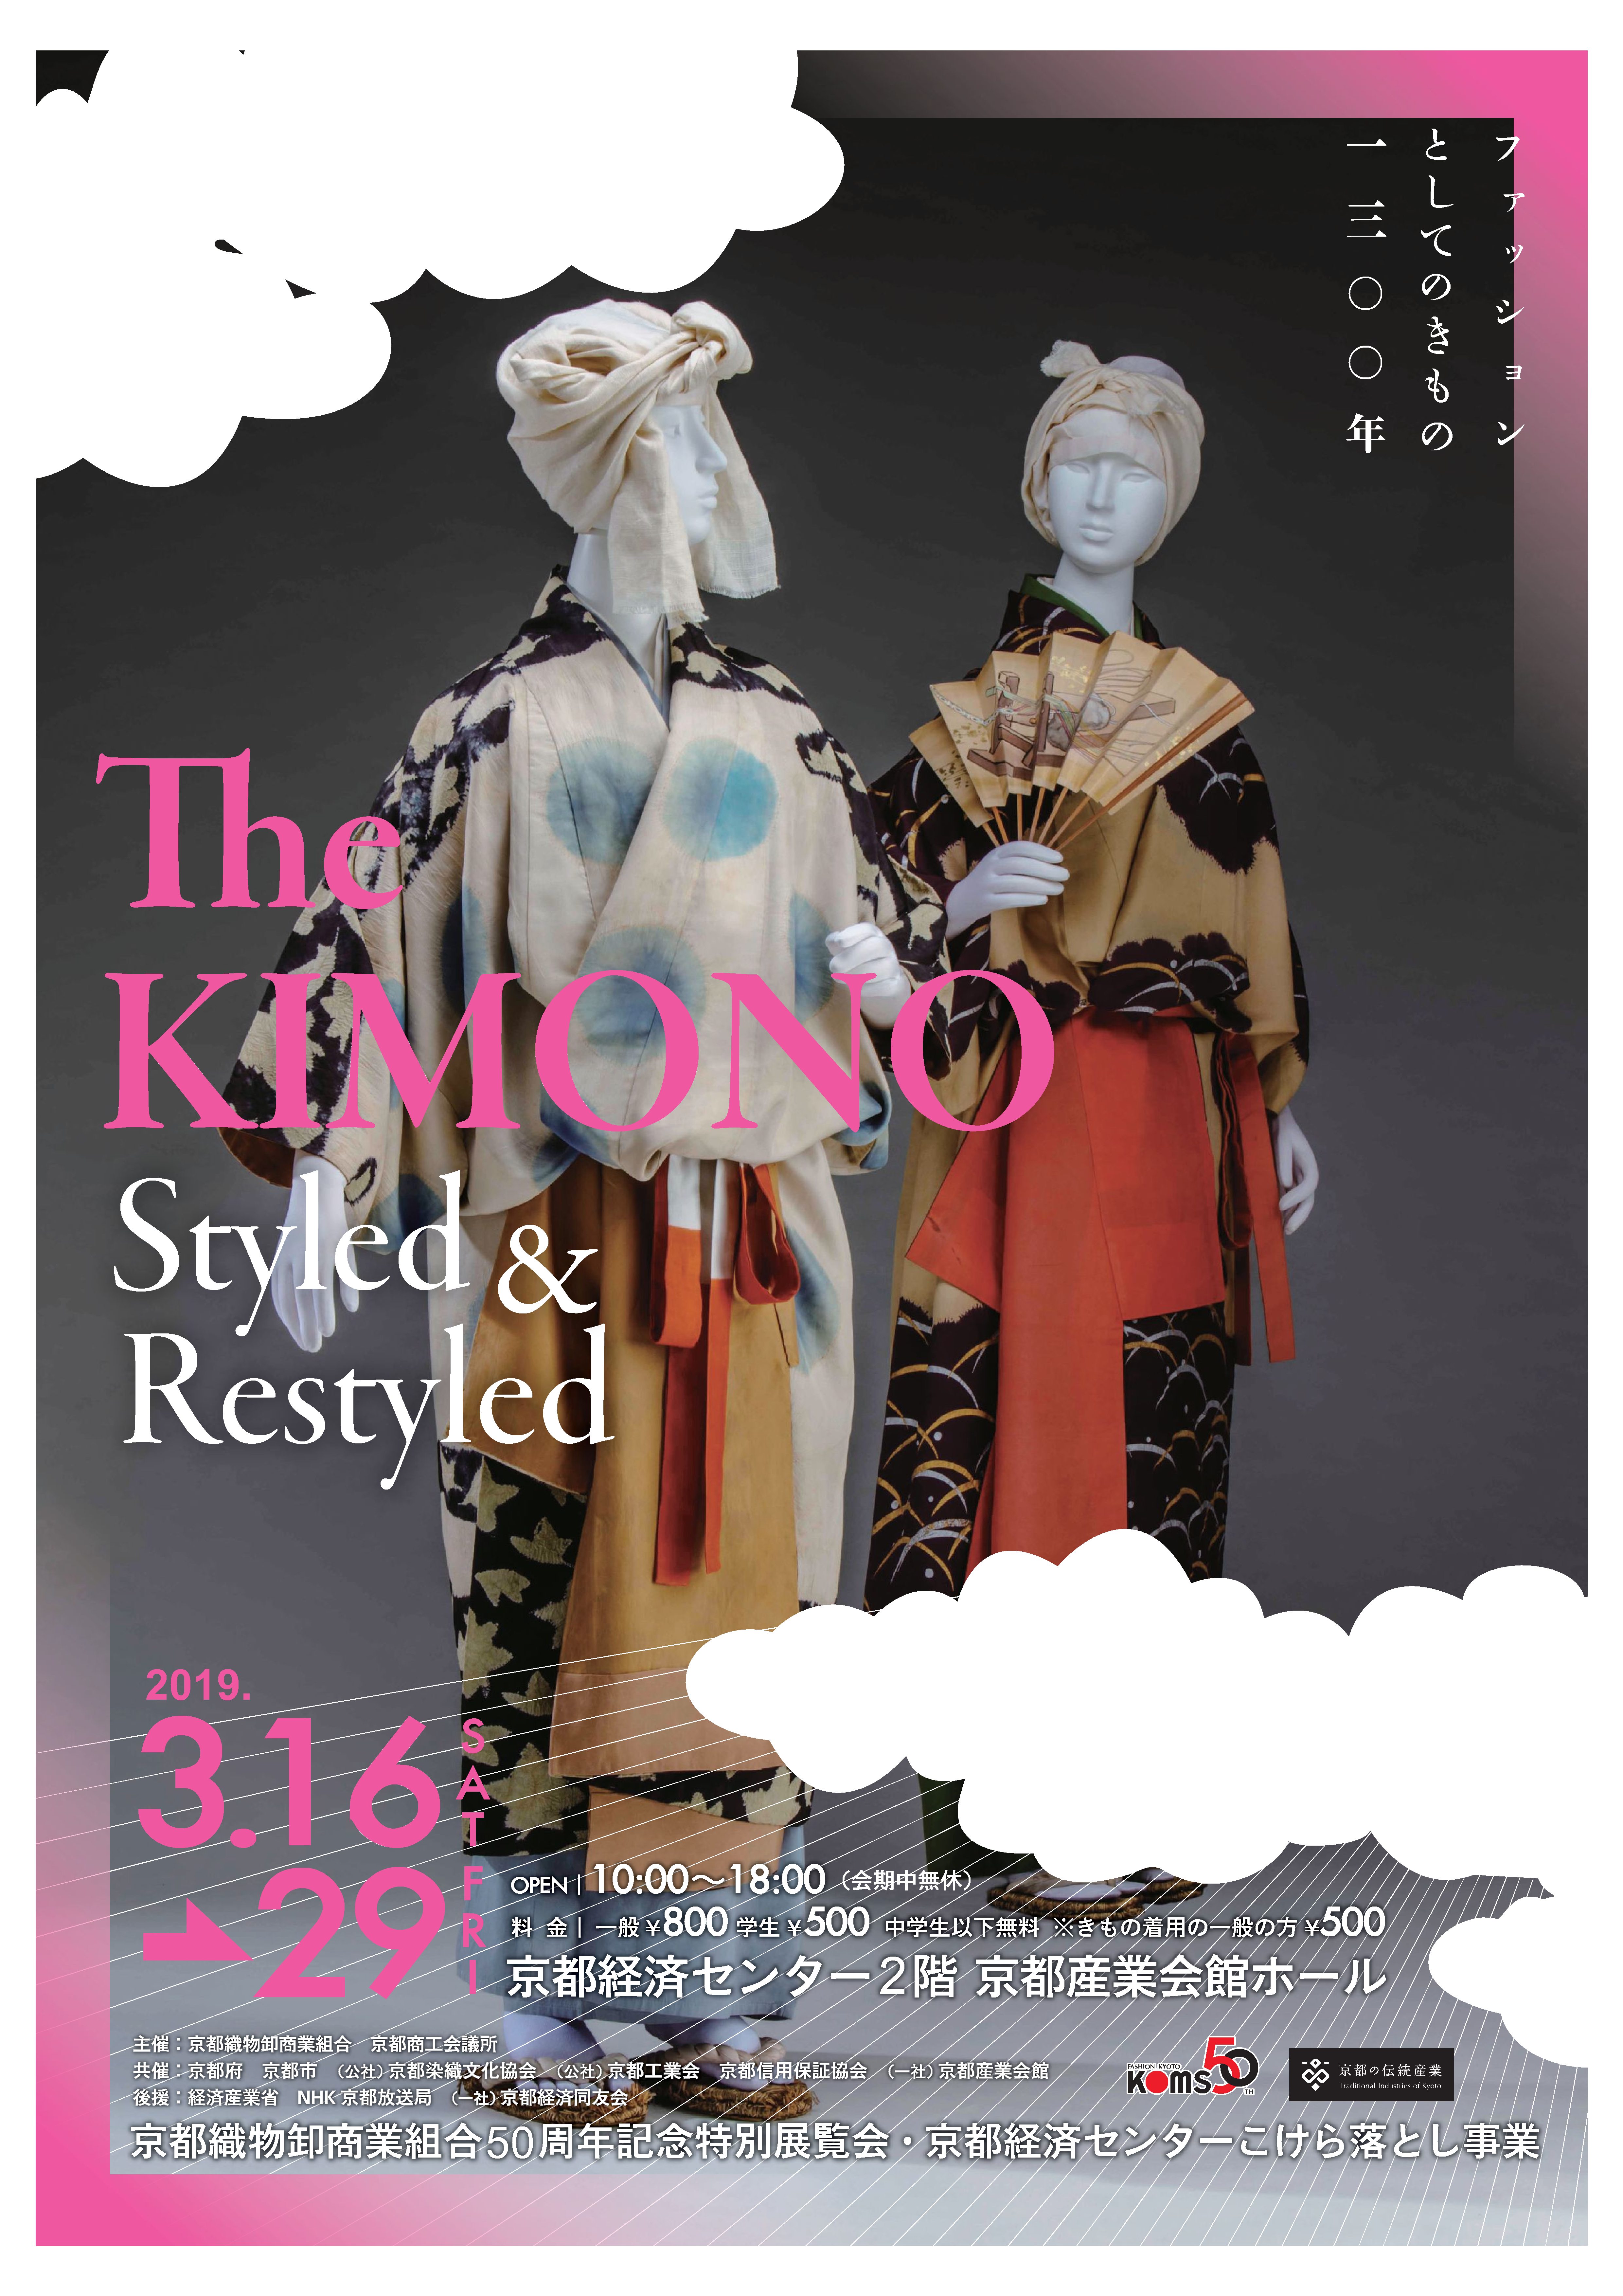 The Kimono Styled And Restyled ファッションとしてのきもの1300年 京都の伝統産業